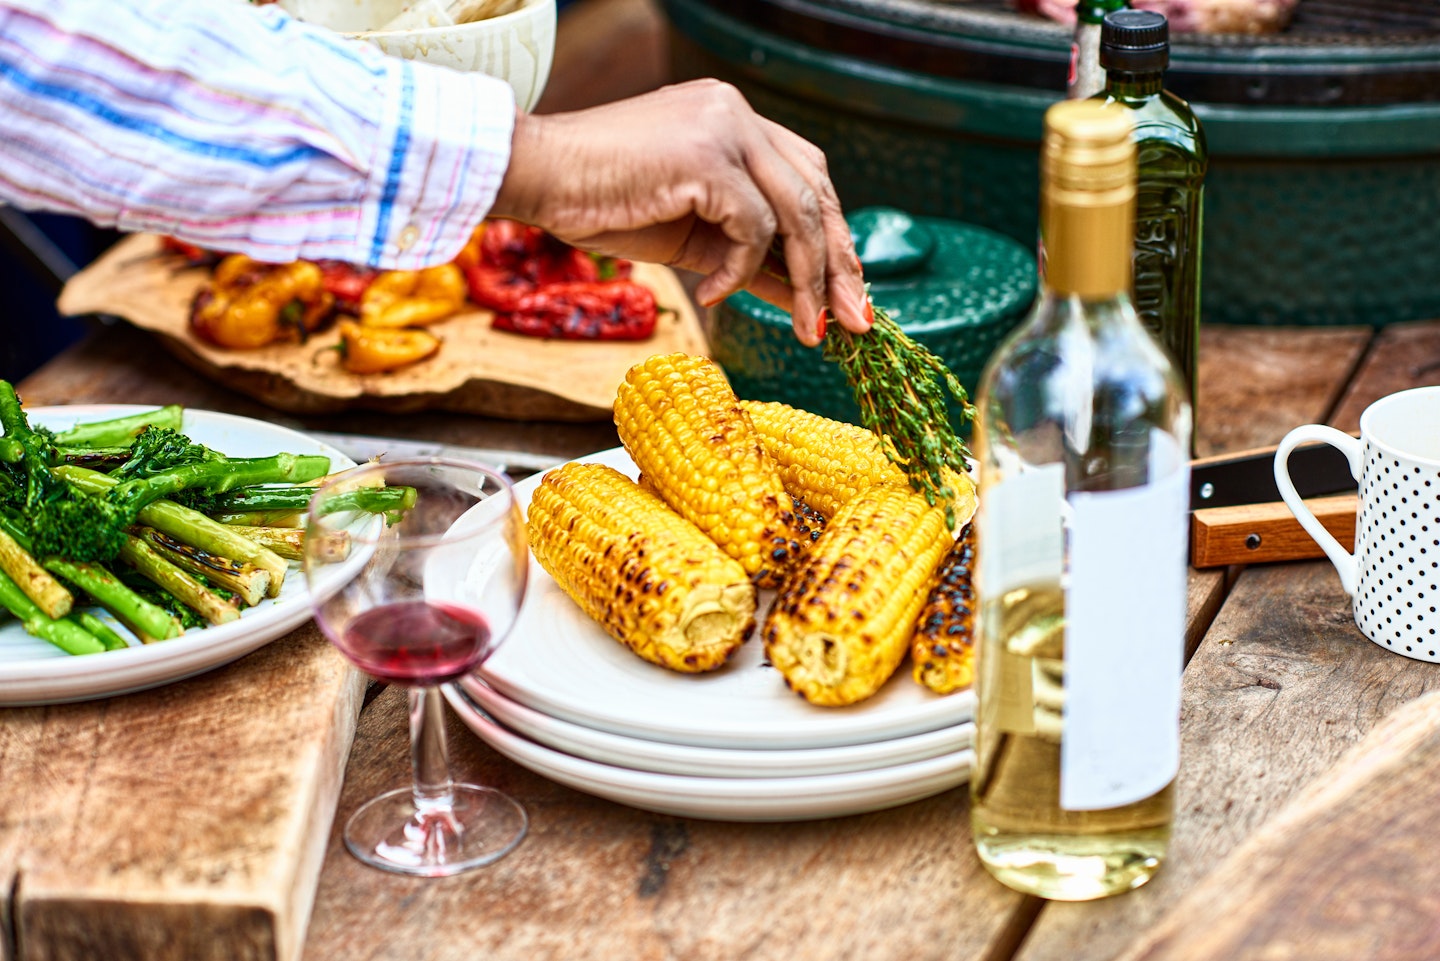 Plate of freshly barbecued corn on the cob and herbs